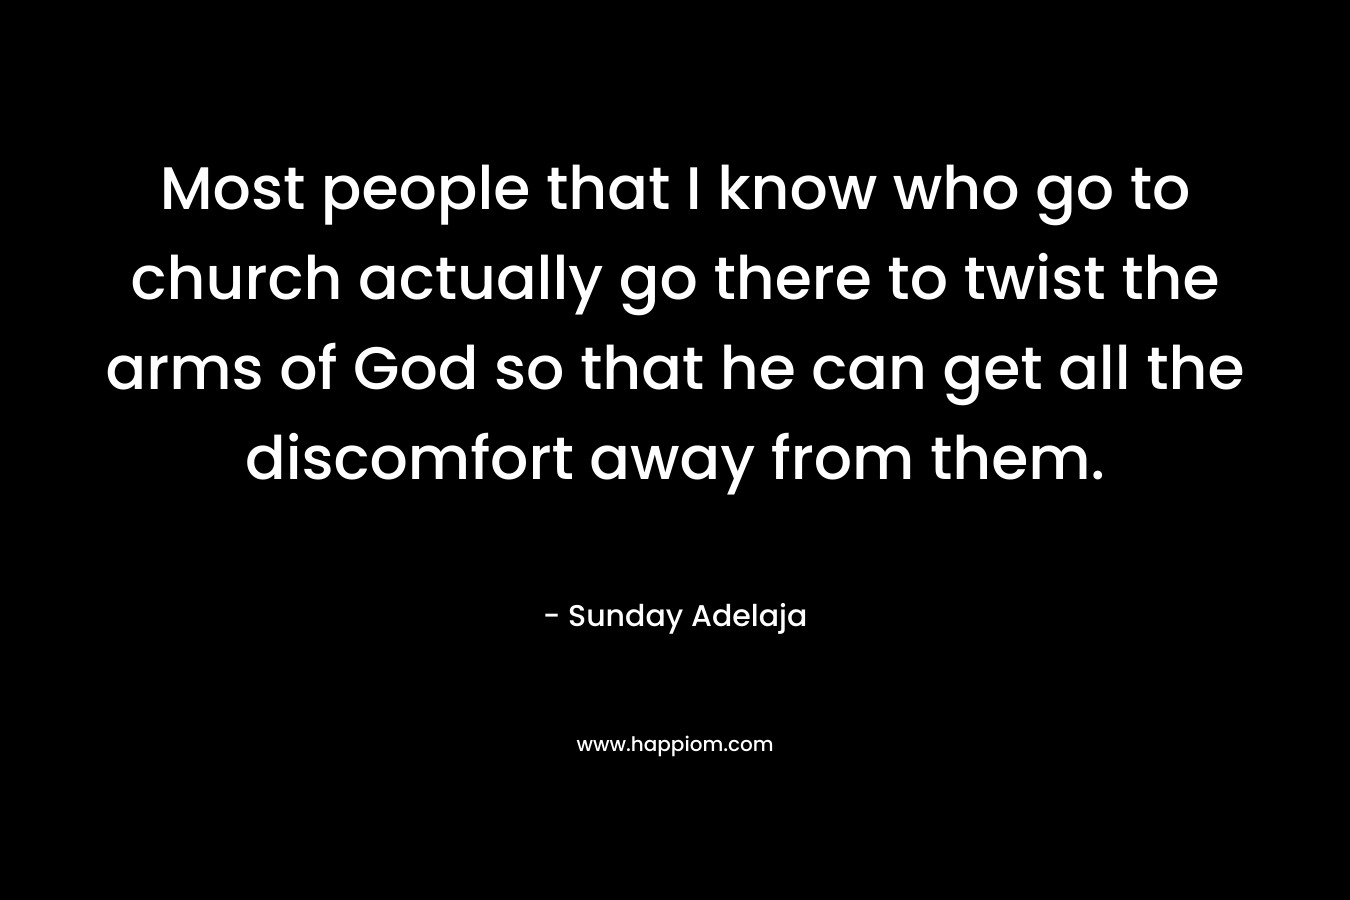 Most people that I know who go to church actually go there to twist the arms of God so that he can get all the discomfort away from them. – Sunday Adelaja